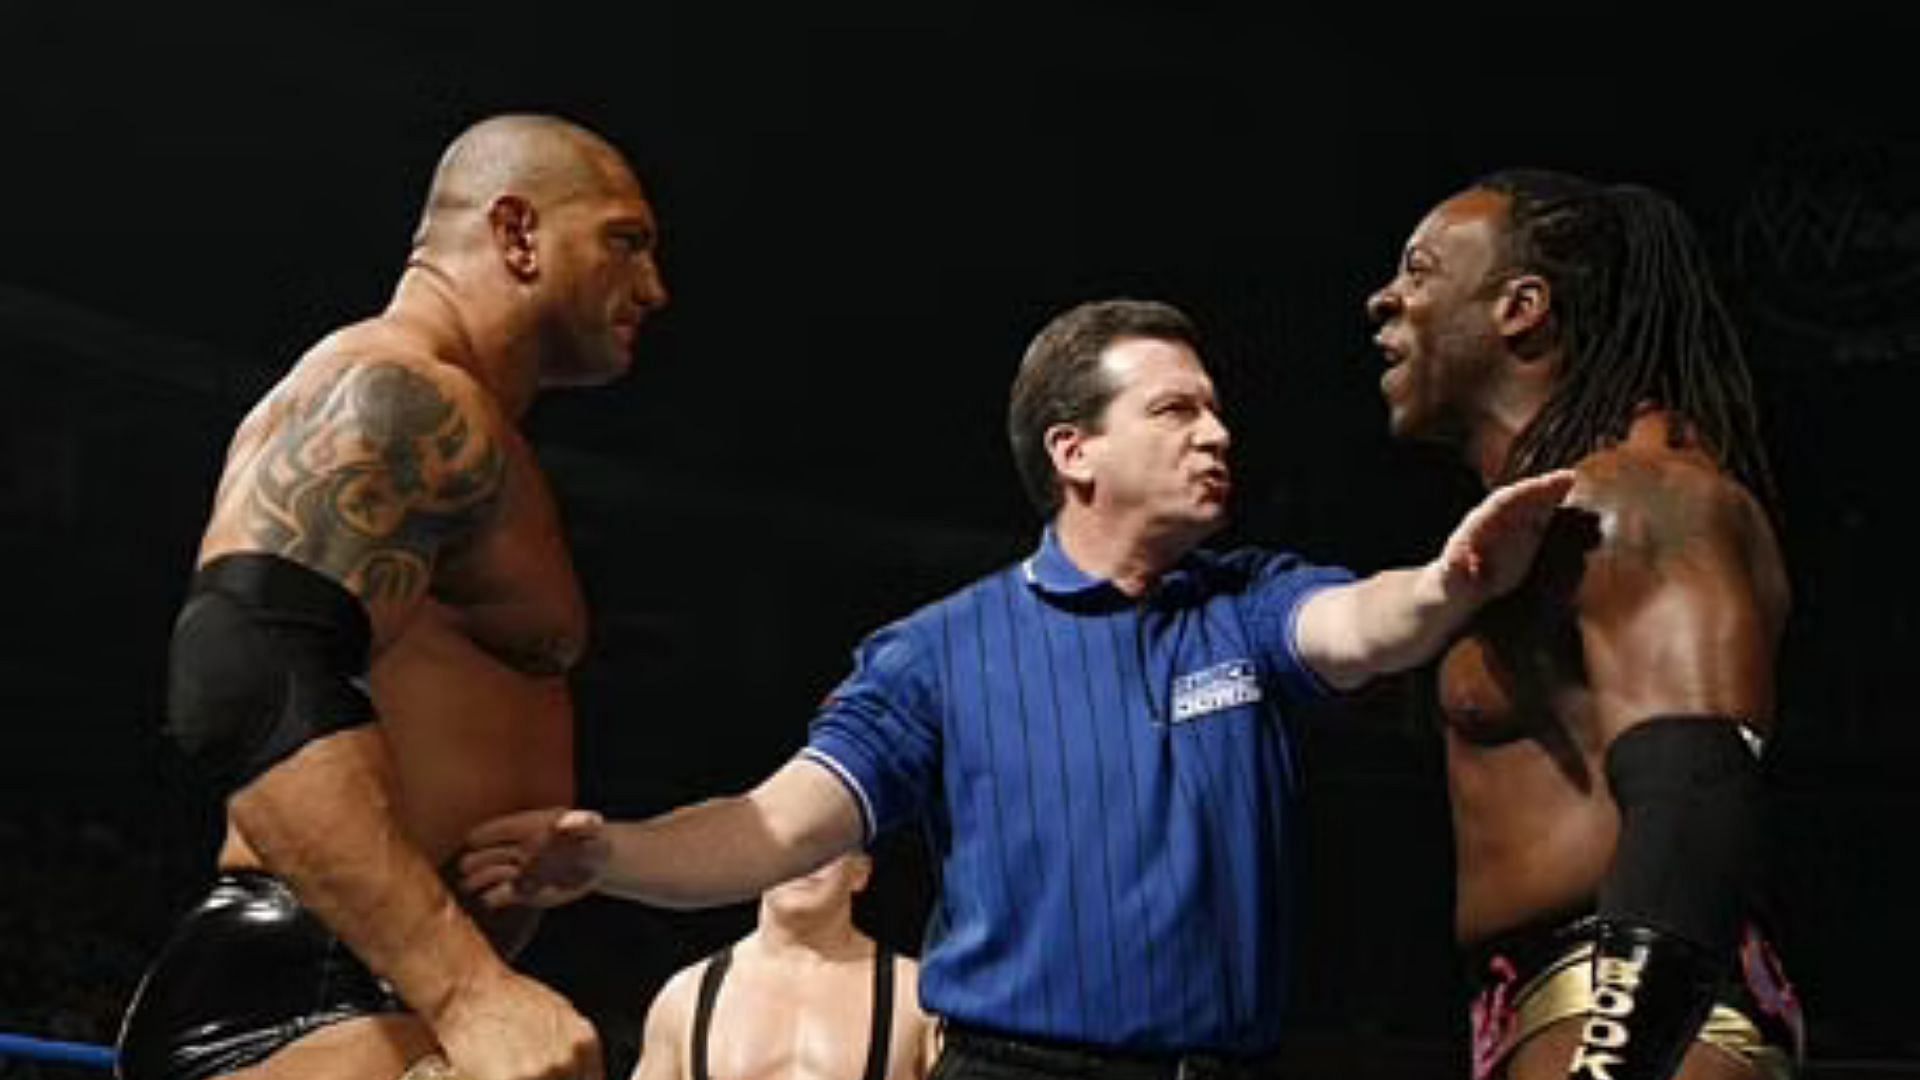 Batista and Booker T reportedly went at it outside the ring as well